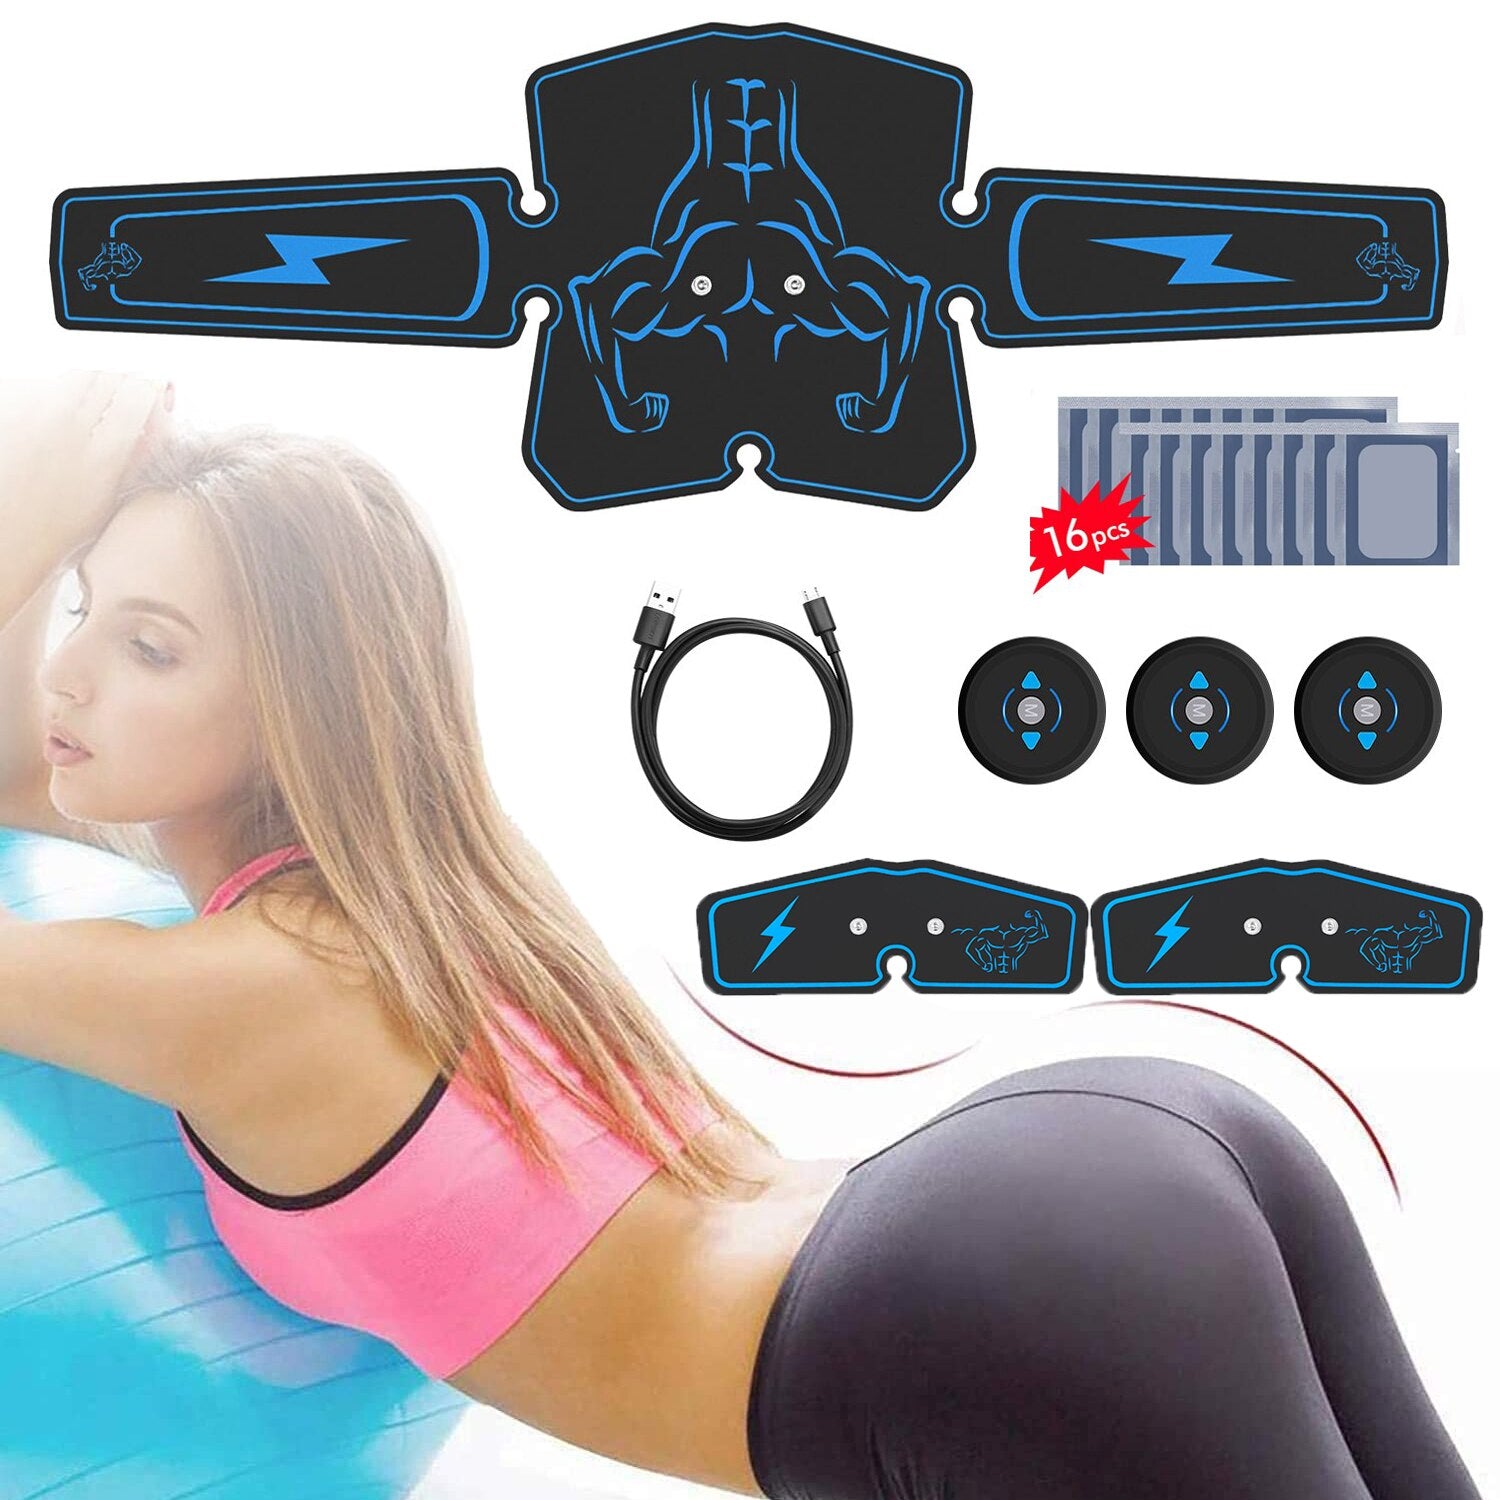 iFanze iThrough Abs Stimulator, Portable Ultimate Muscle Toner with 16